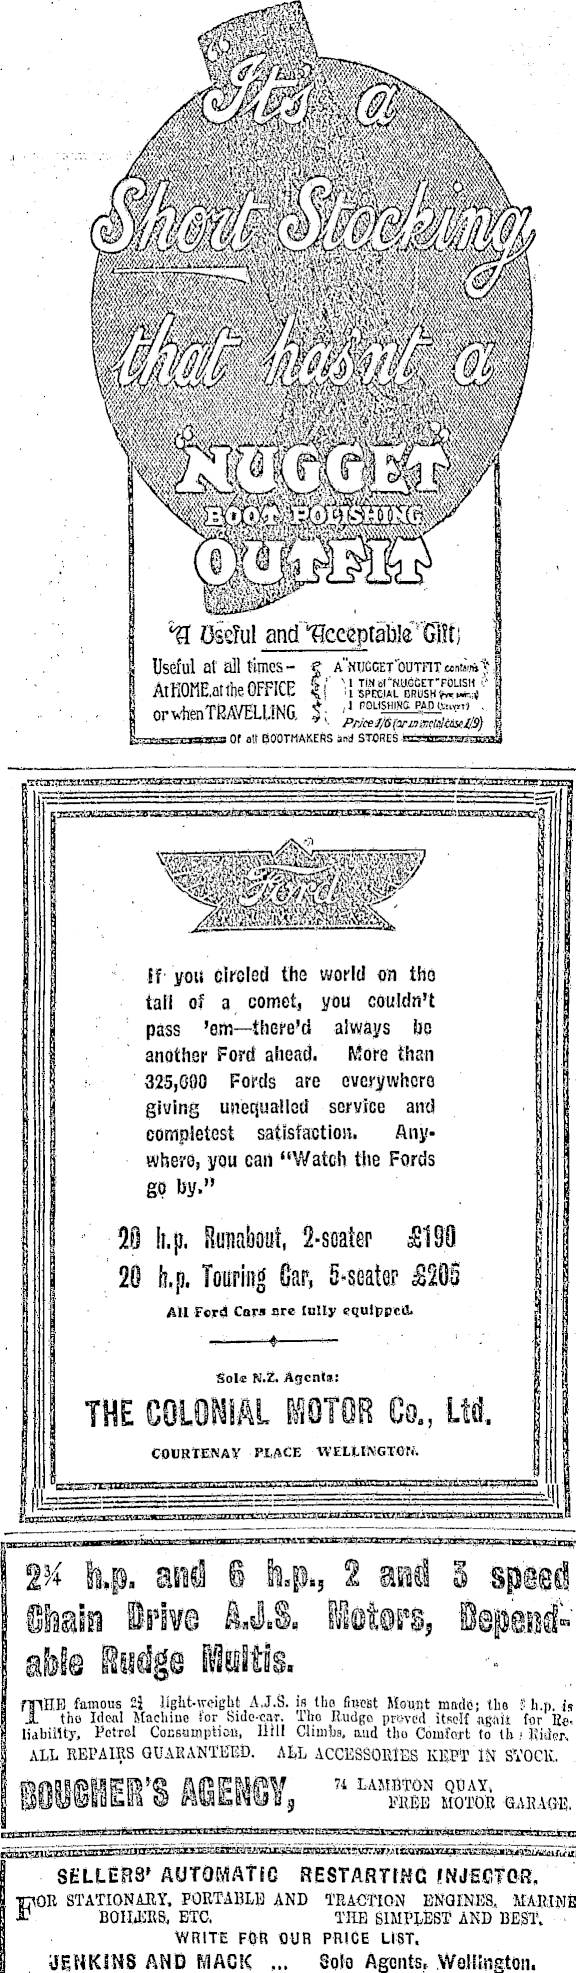 Papers Past Newspapers Dominion 15 December 1913 Page 9 Advertisements Column 5